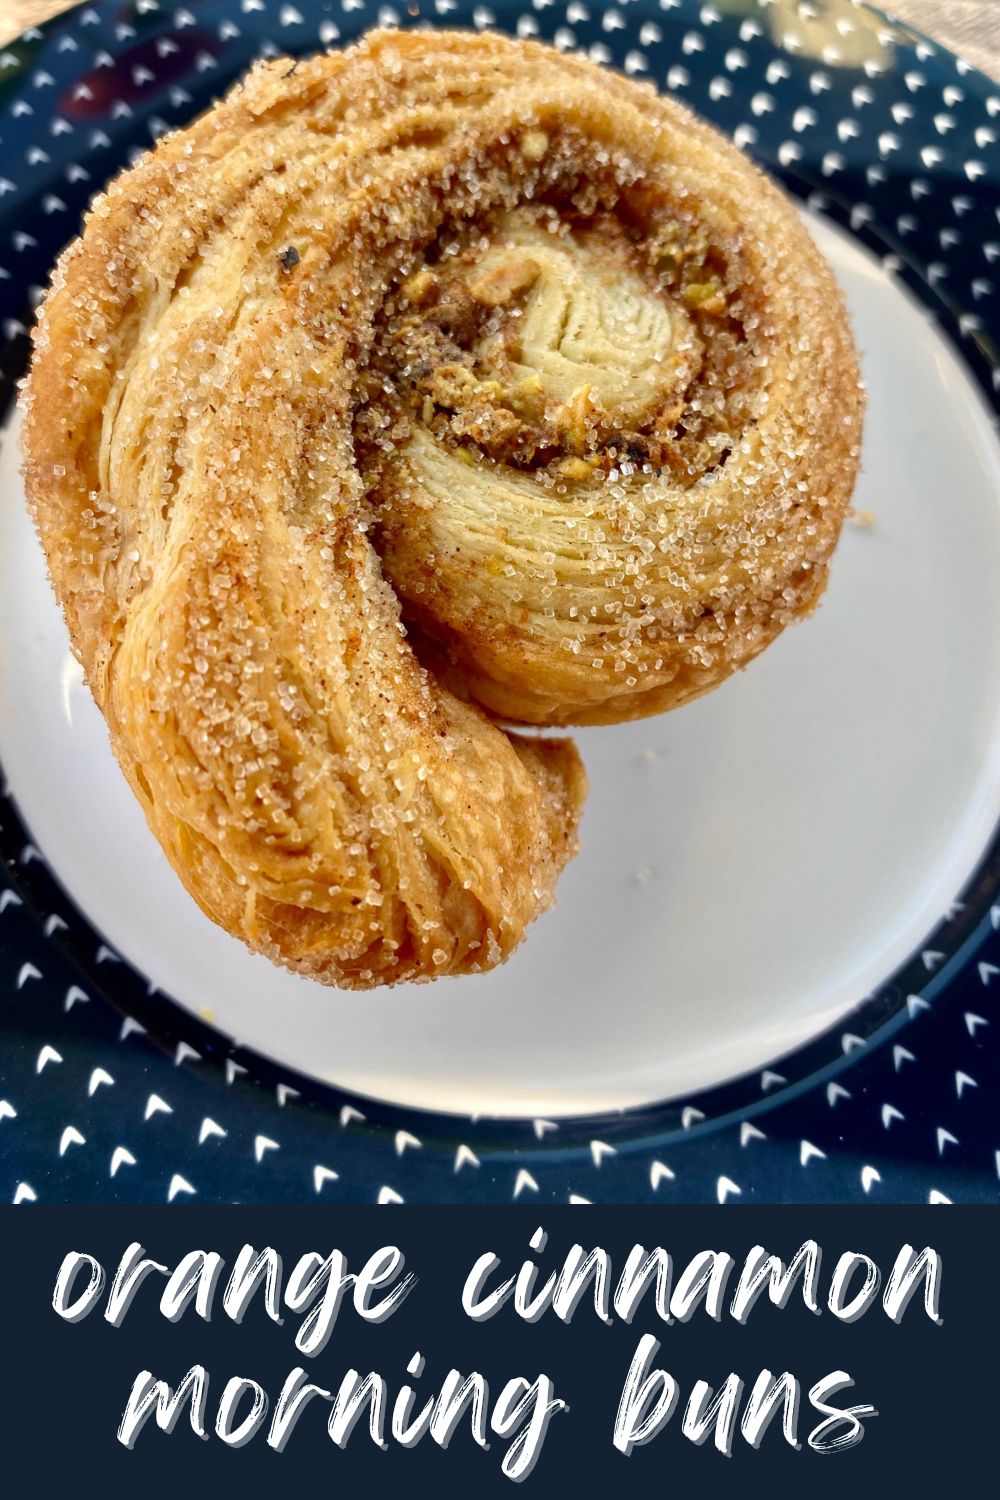 Amazing Orange Cinnamon Morning Buns | These orange cinnamon pistachio morning buns are absolute perfection! Flaky laminated dough, how to make morning buns, how to laminate dough. They're time-consuming but not difficult, & absolutely delicious, a fun baking project! Made with croissant dough. #morningbun #laminateddough #bakingproject #breakfast